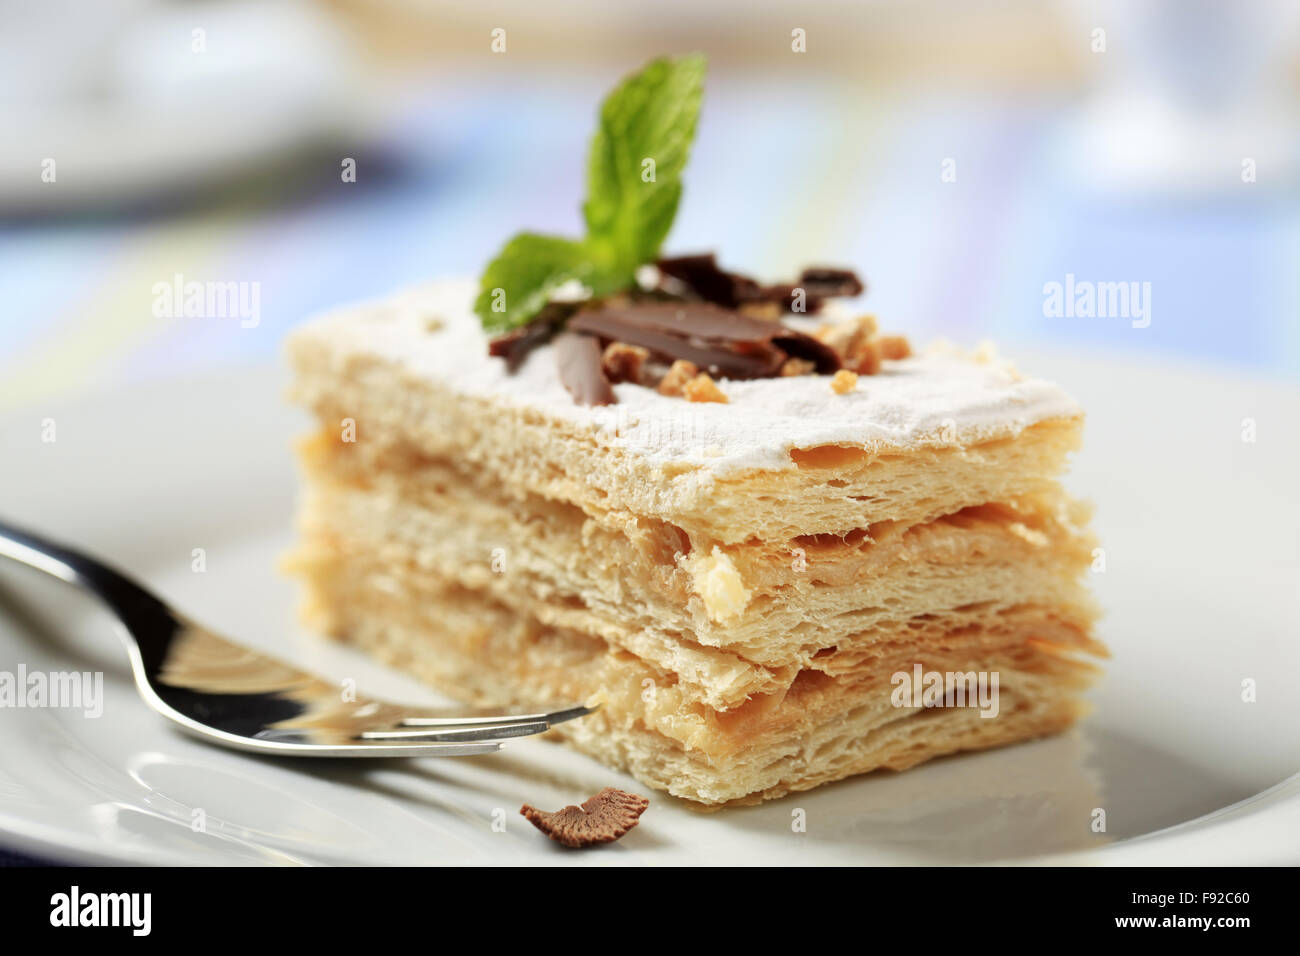 Mille-feuille pastry dusted with powdered sugar Stock Photo